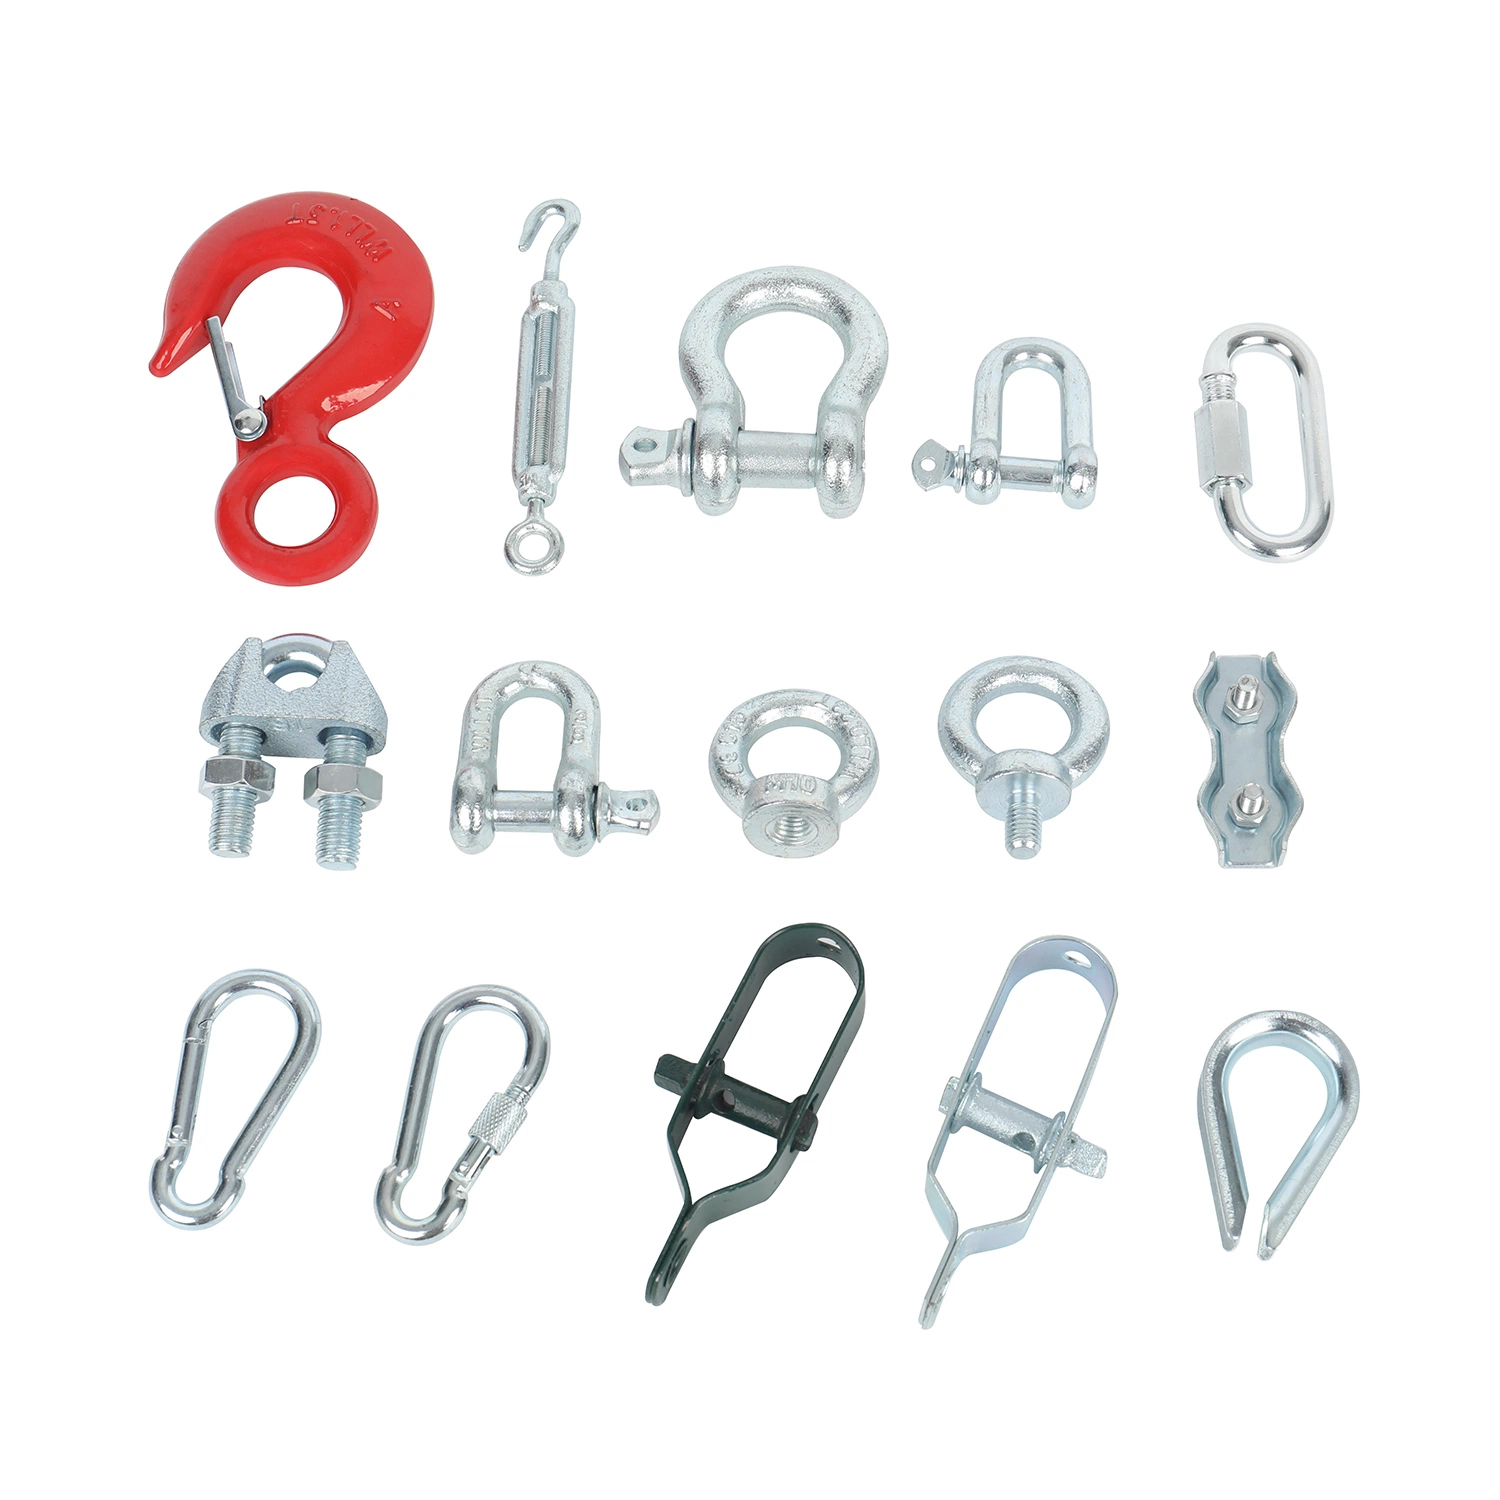 China Factory Supply D Shackle-Wire Rope Clips-Turnbuckle-Spring Snap Hook-Eye Bolt-Eye Nut-Thimble-Round Ring-Swage Terminal-G80 Clevis Grab Hook-Riggings